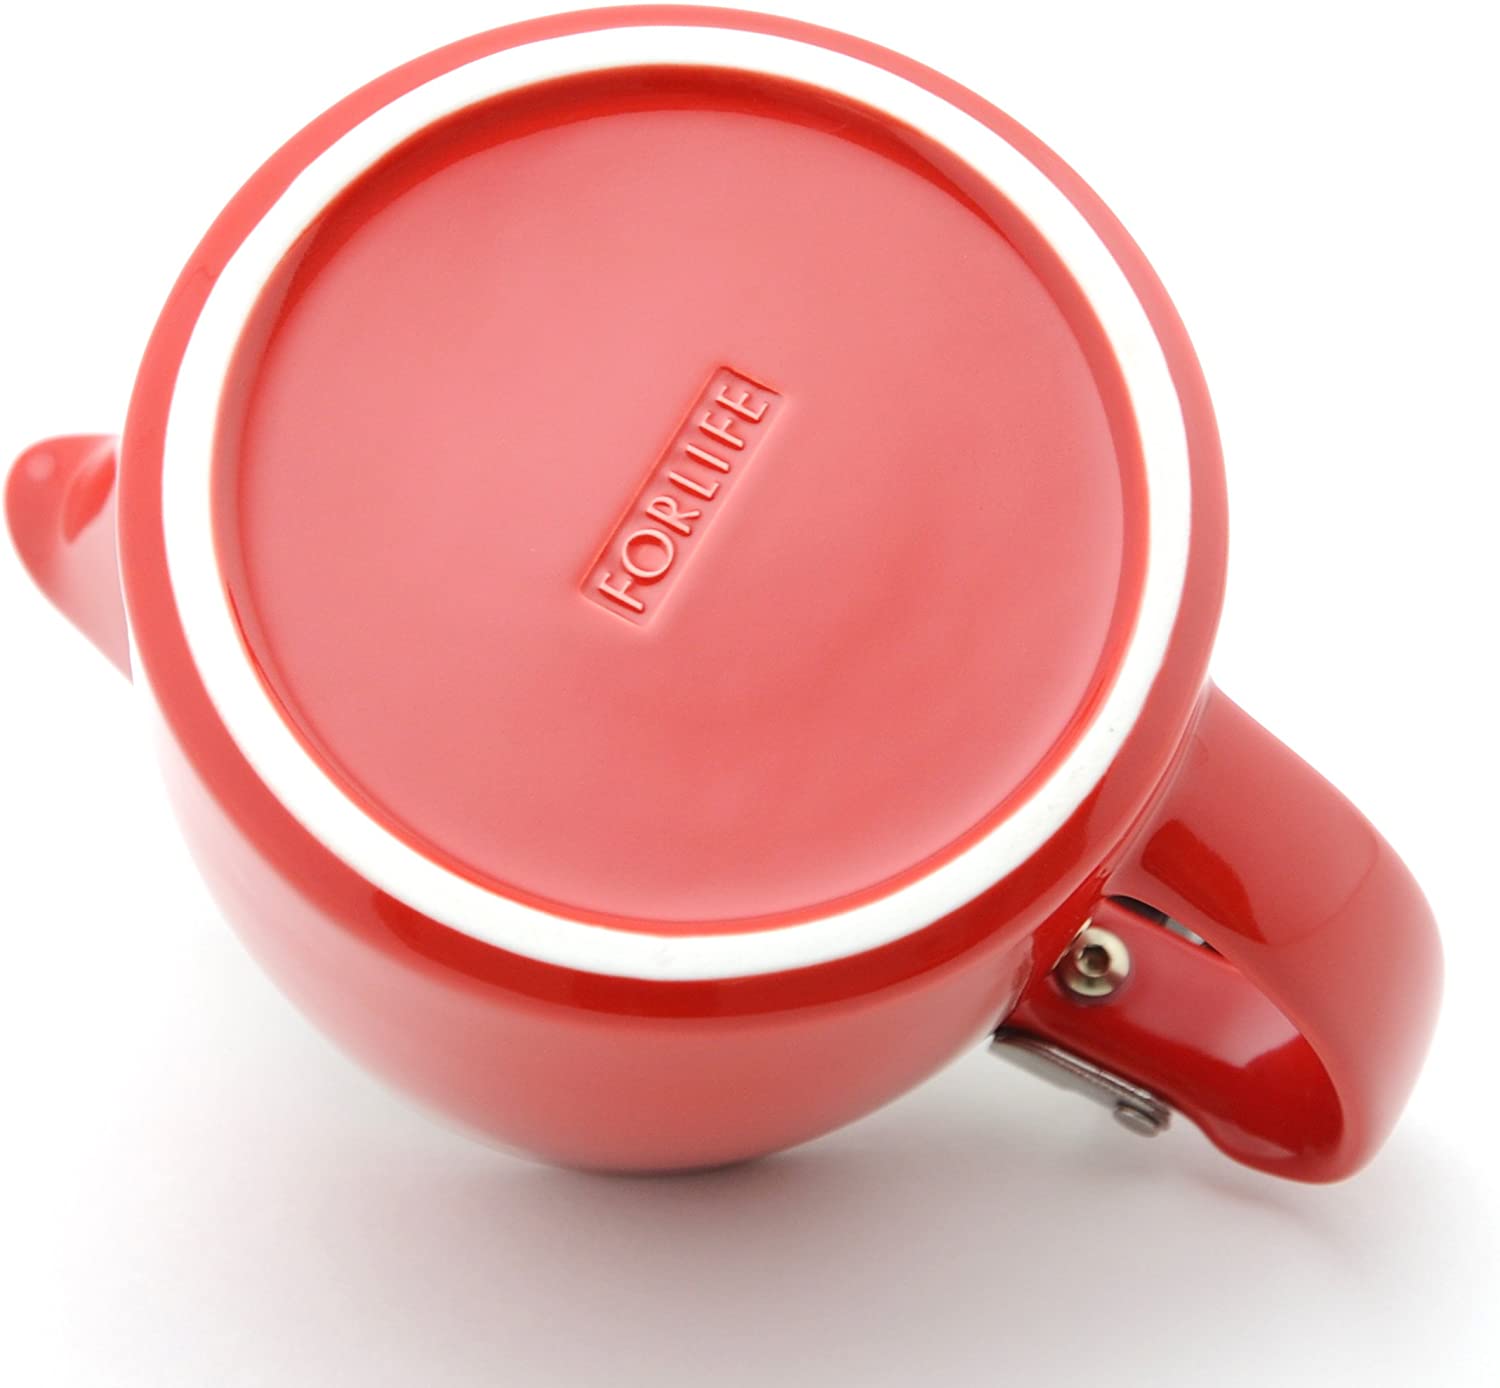 Forlife Stump Teapot with Stainless Steel Lid & Infuser, Red, 18 oz